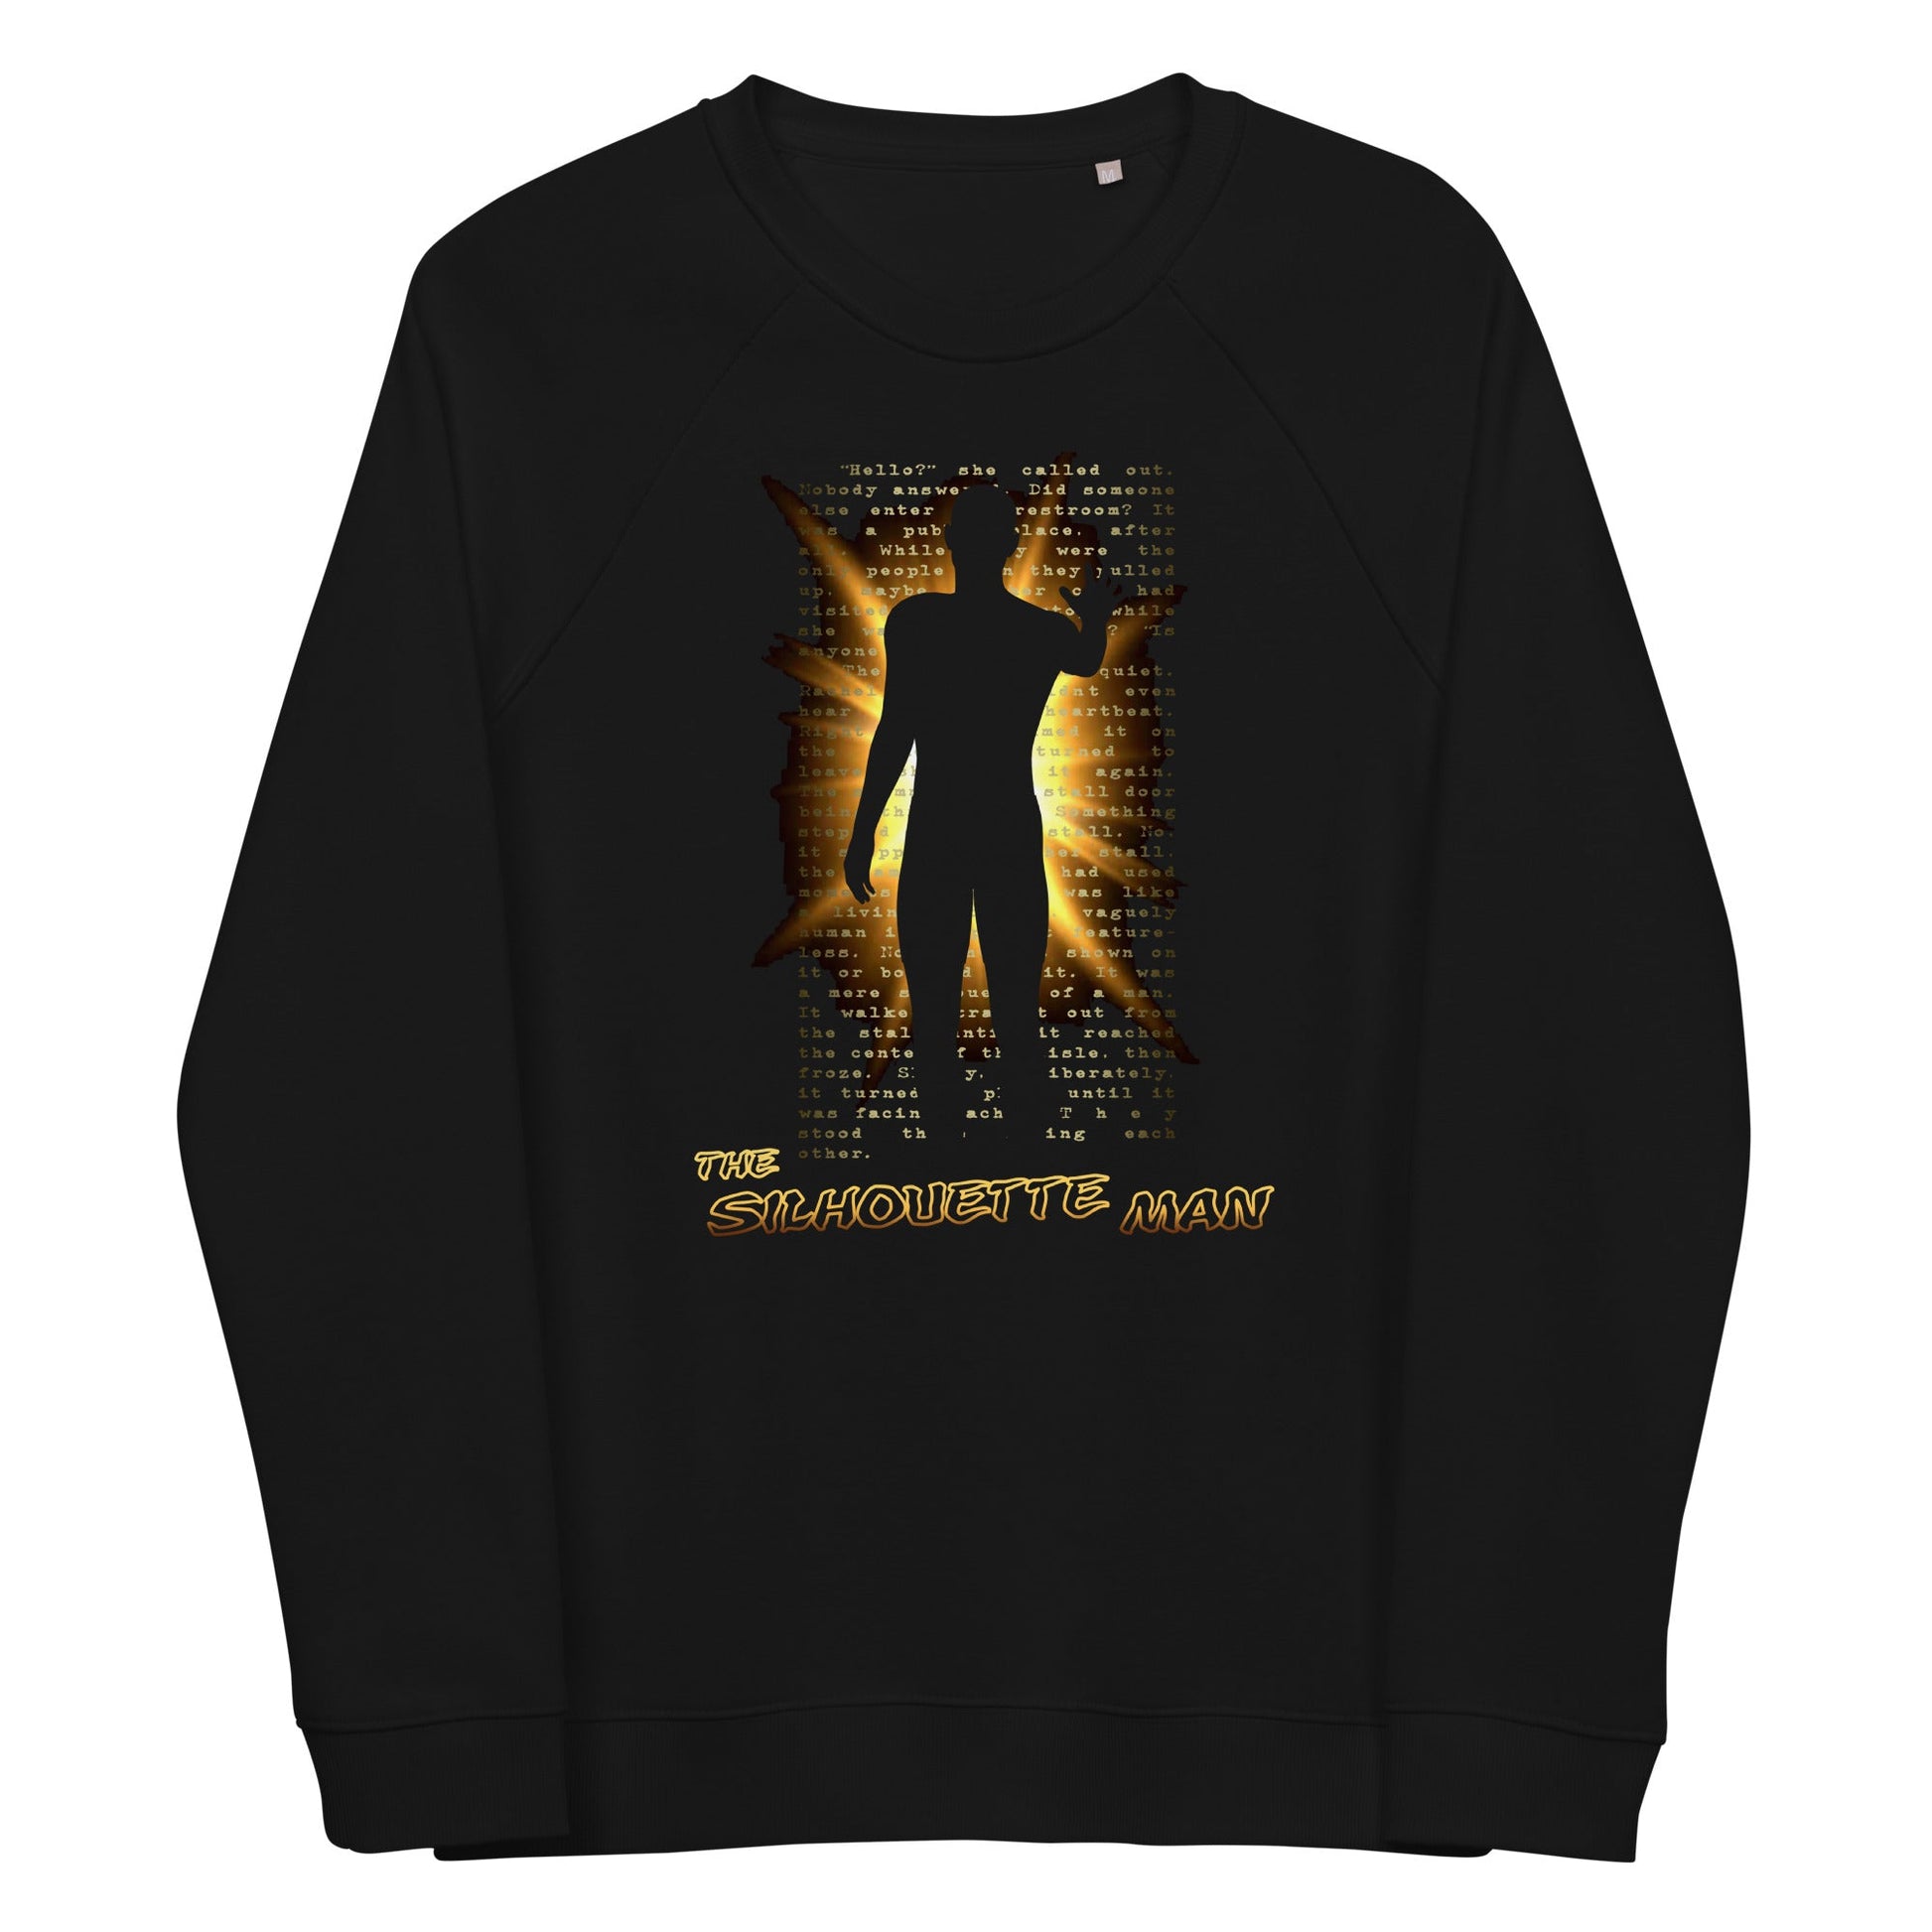 The Silhouette Man | Unisex Organic Raglan Sweatshirt - Embrace the Shadows - Spectral Ink Shop - Sweaters and Hoodies -3019046_14898